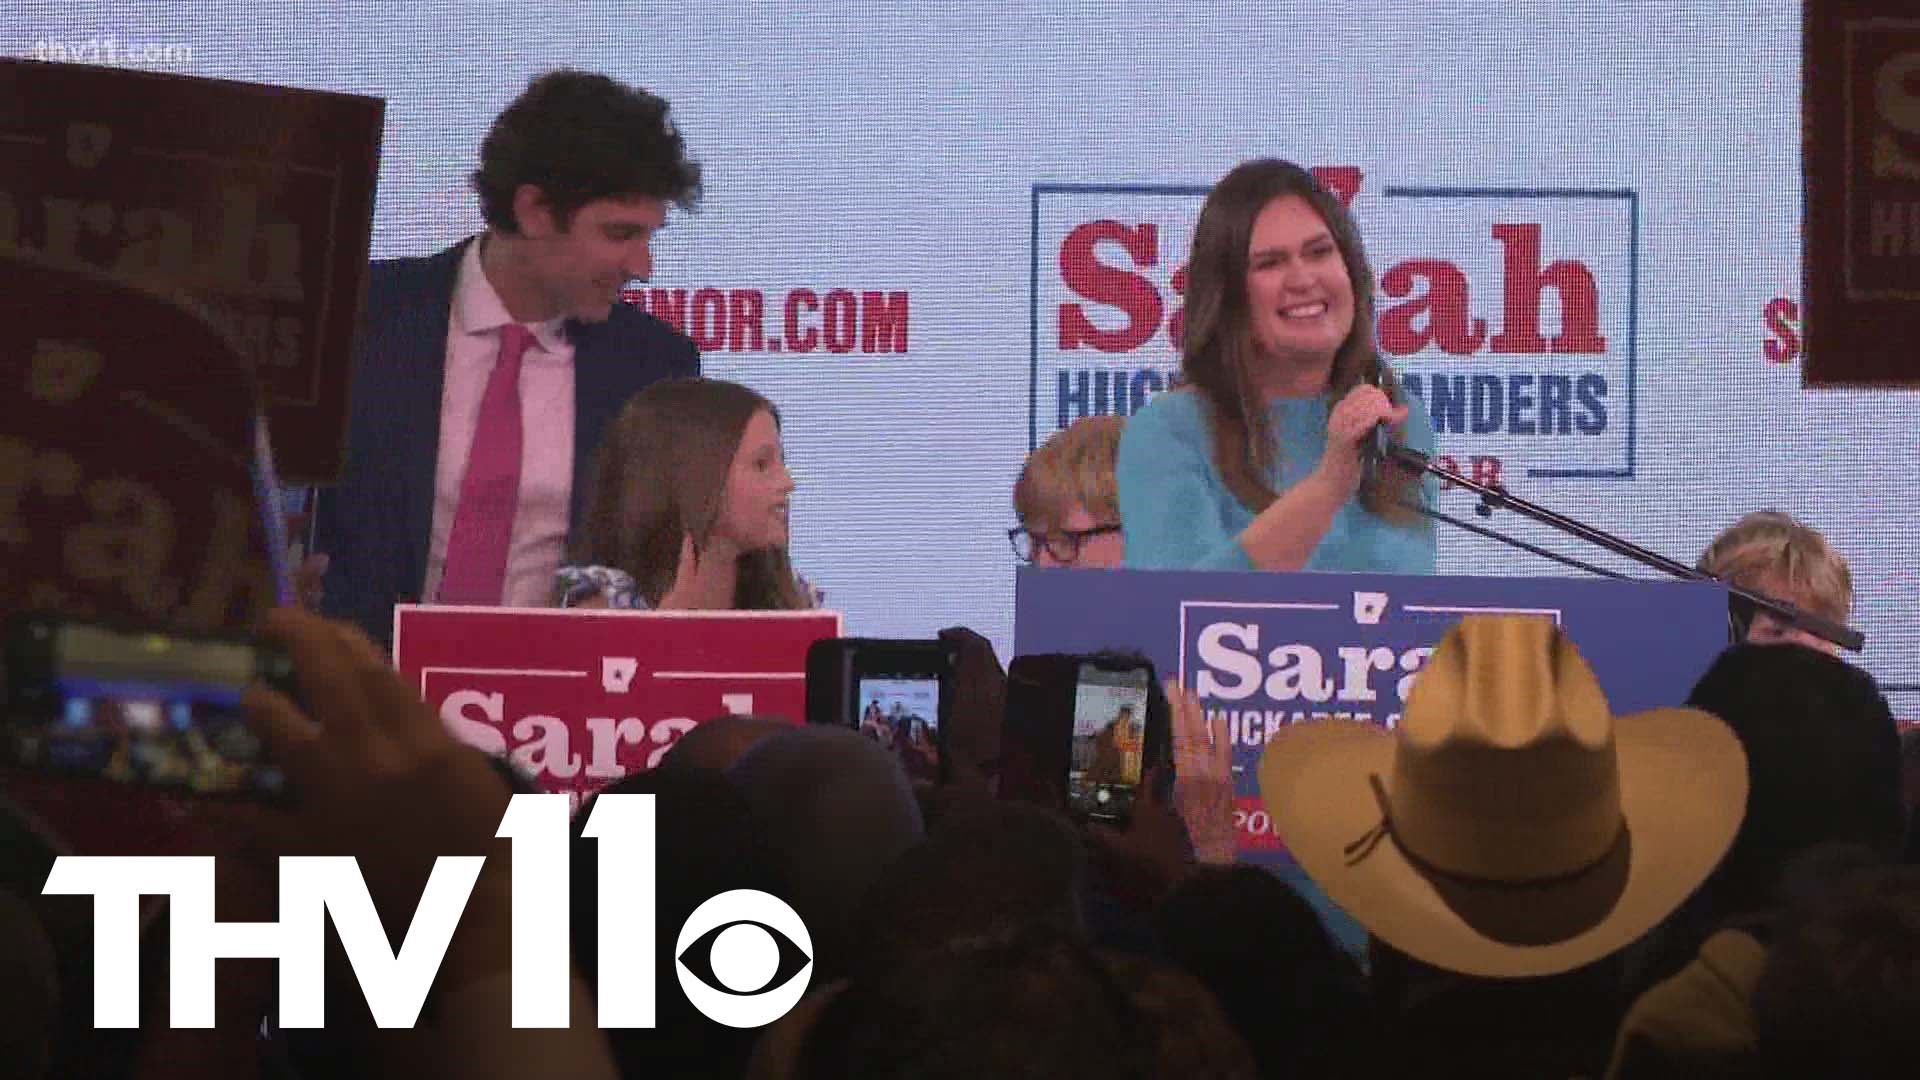 Arkansas governor candidate Sarah Huckabee Sanders announced on Friday that she is recovering after undergoing a successful surgery to treat thyroid cancer.